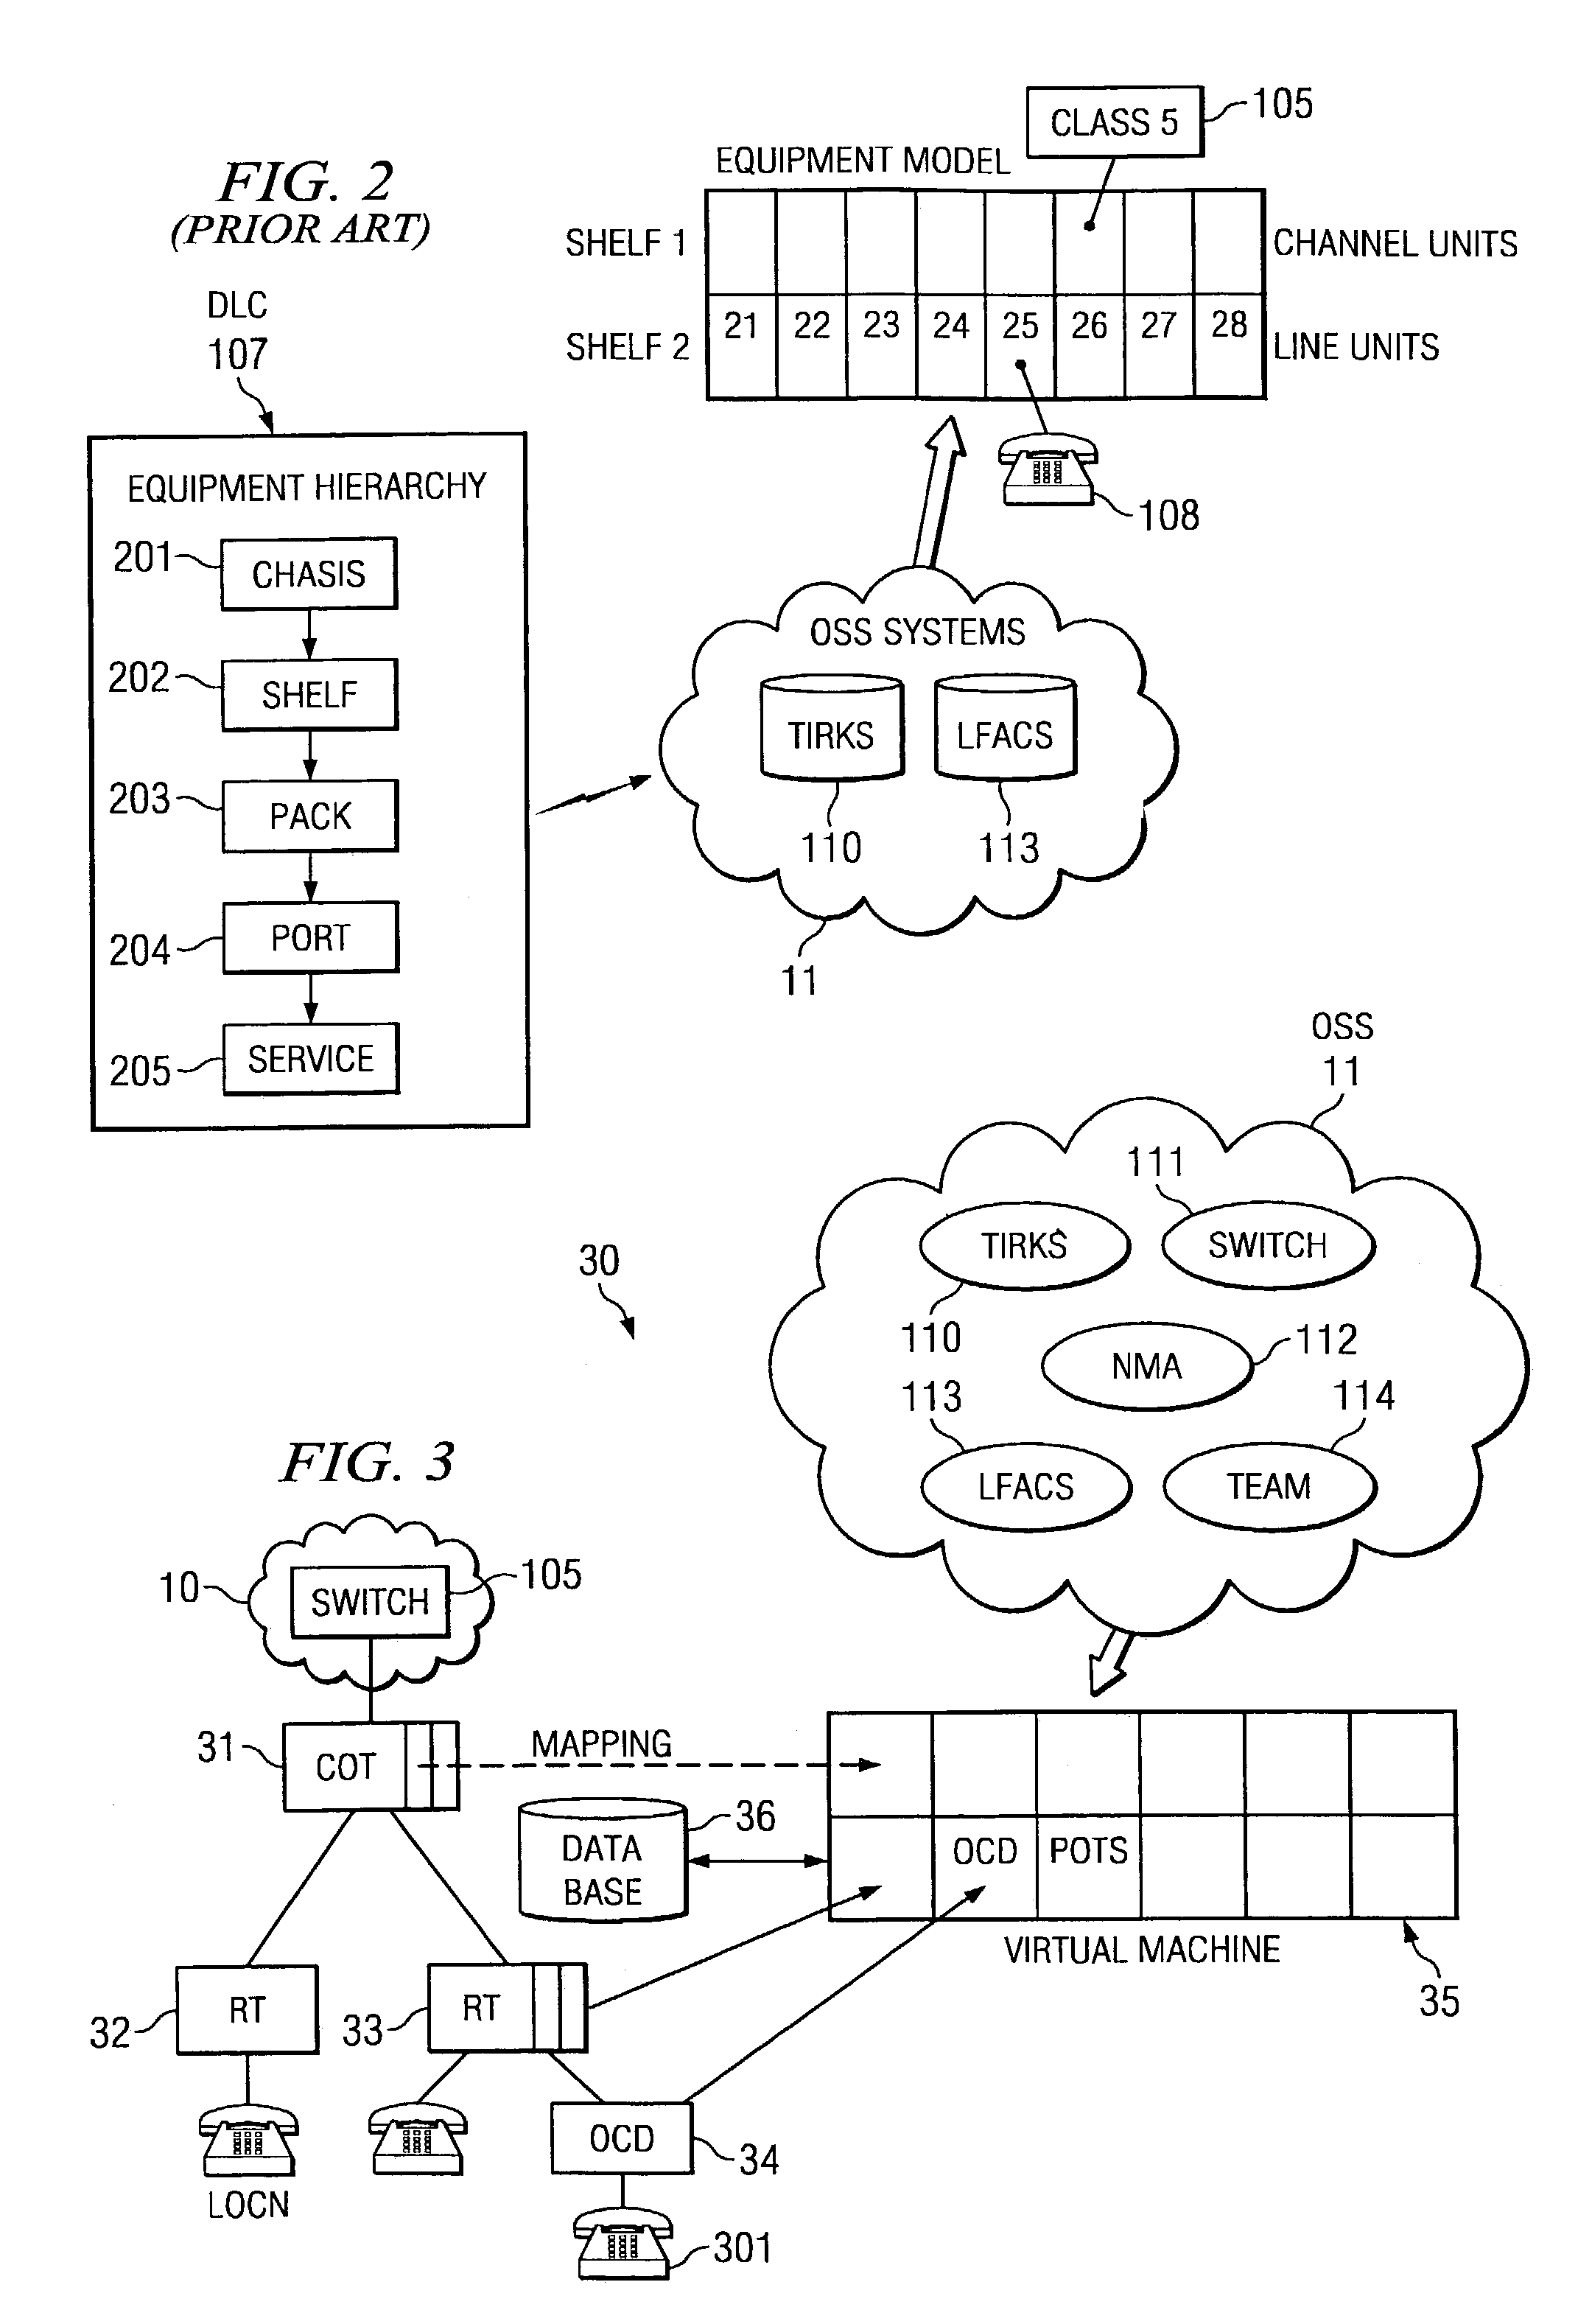 System and method for deploying new equipment and services in conjunction with a legacy provisioning system